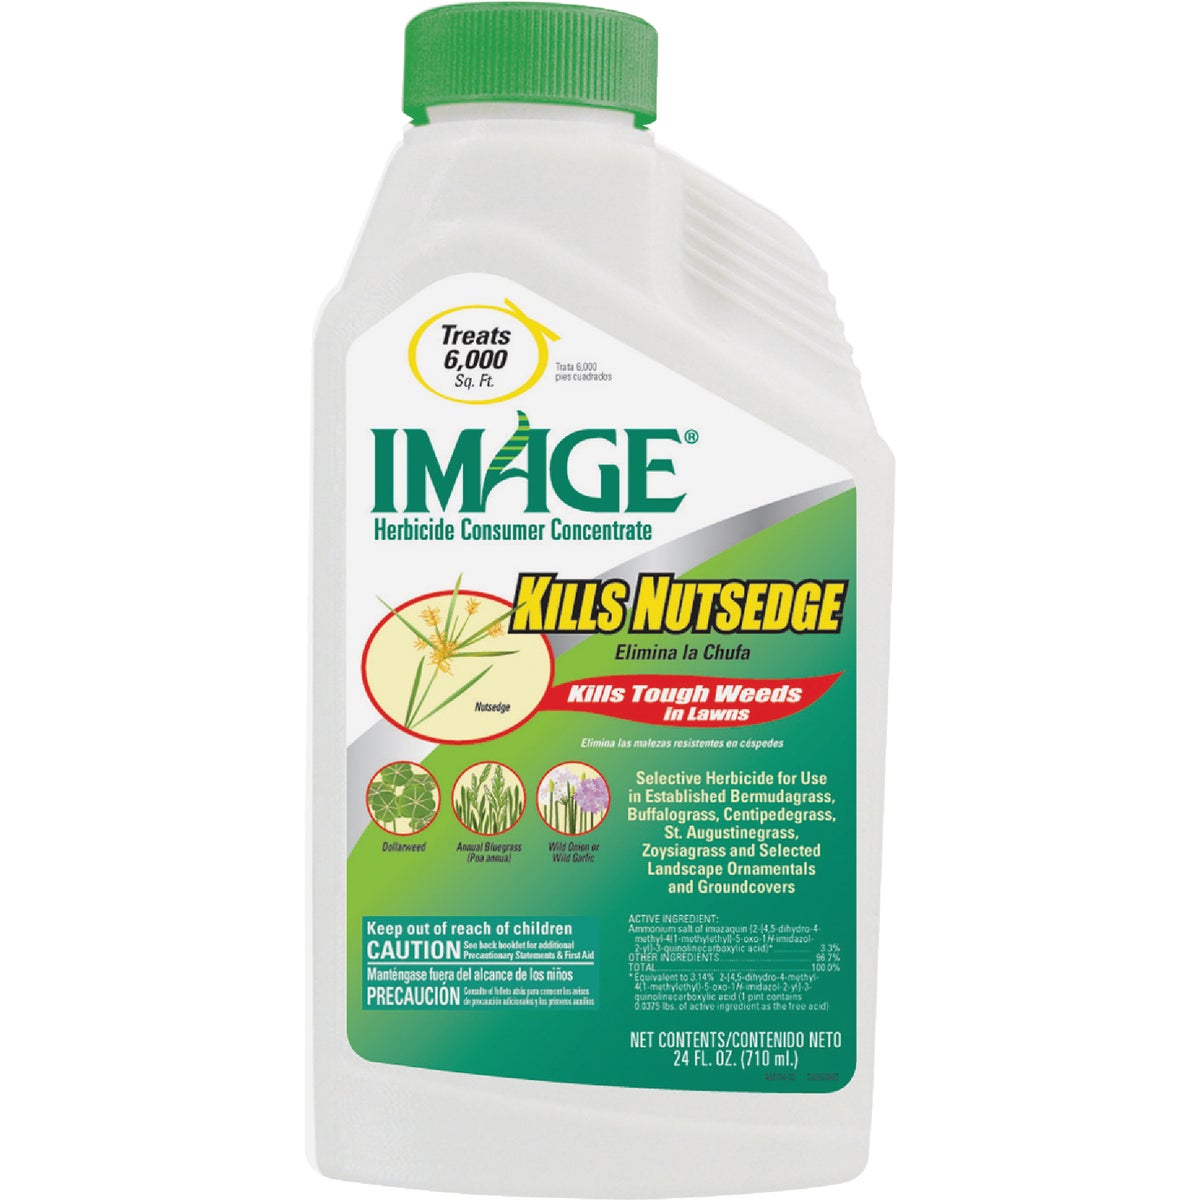 Item 768850, Image is a post-emergent, selective herbicide for use in southern turfgrass